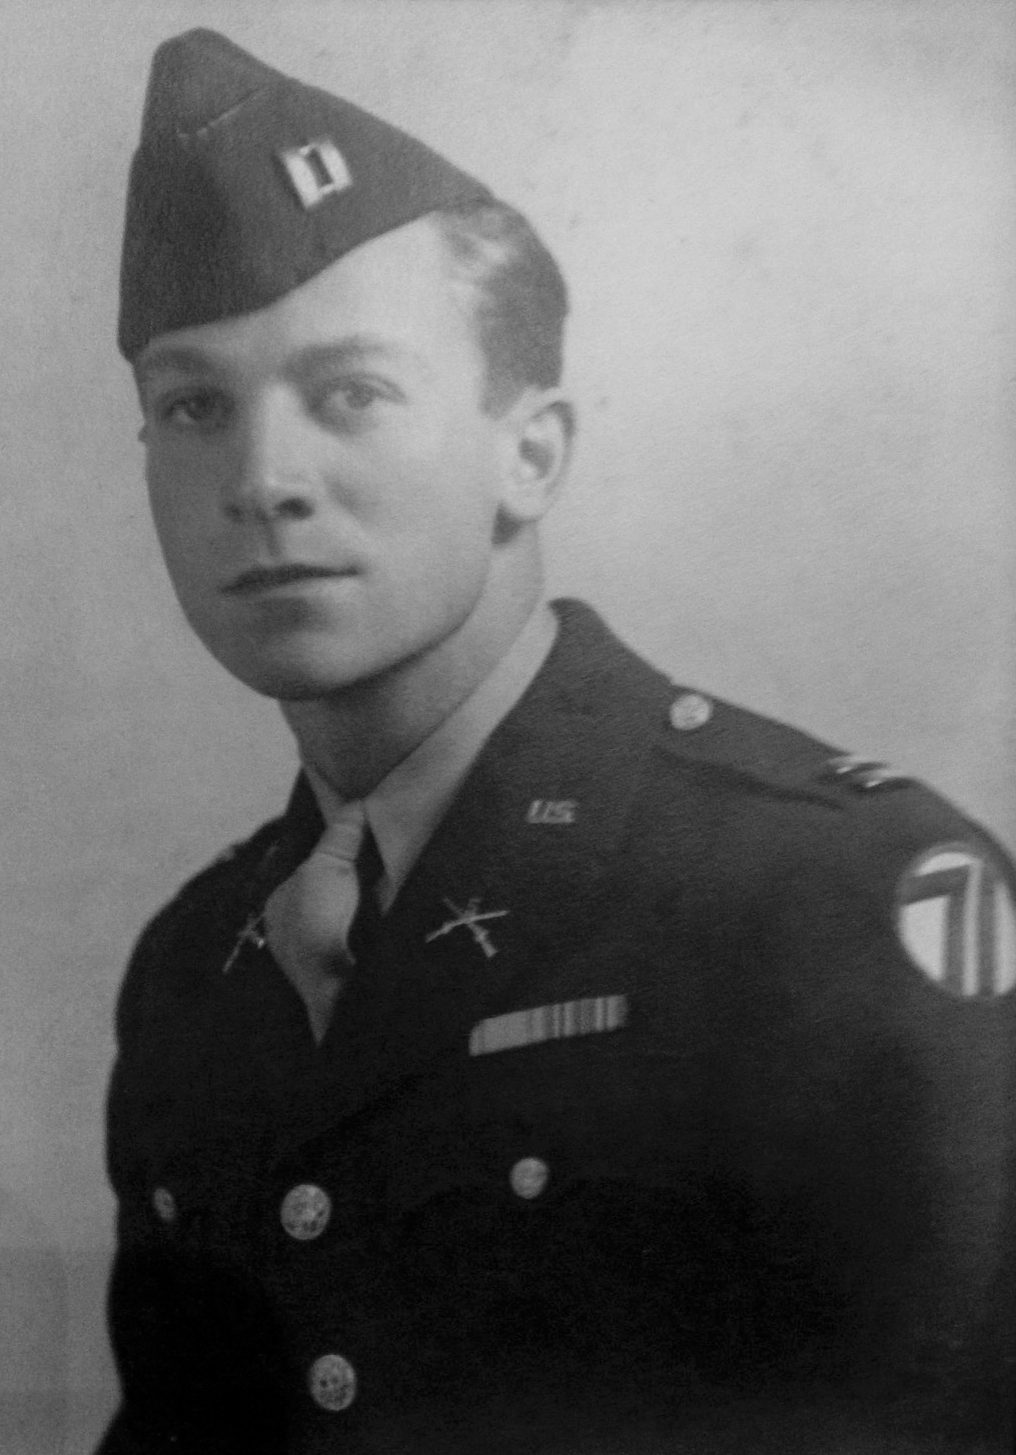 A formal black and white historical photo of a man in Army dress uniform